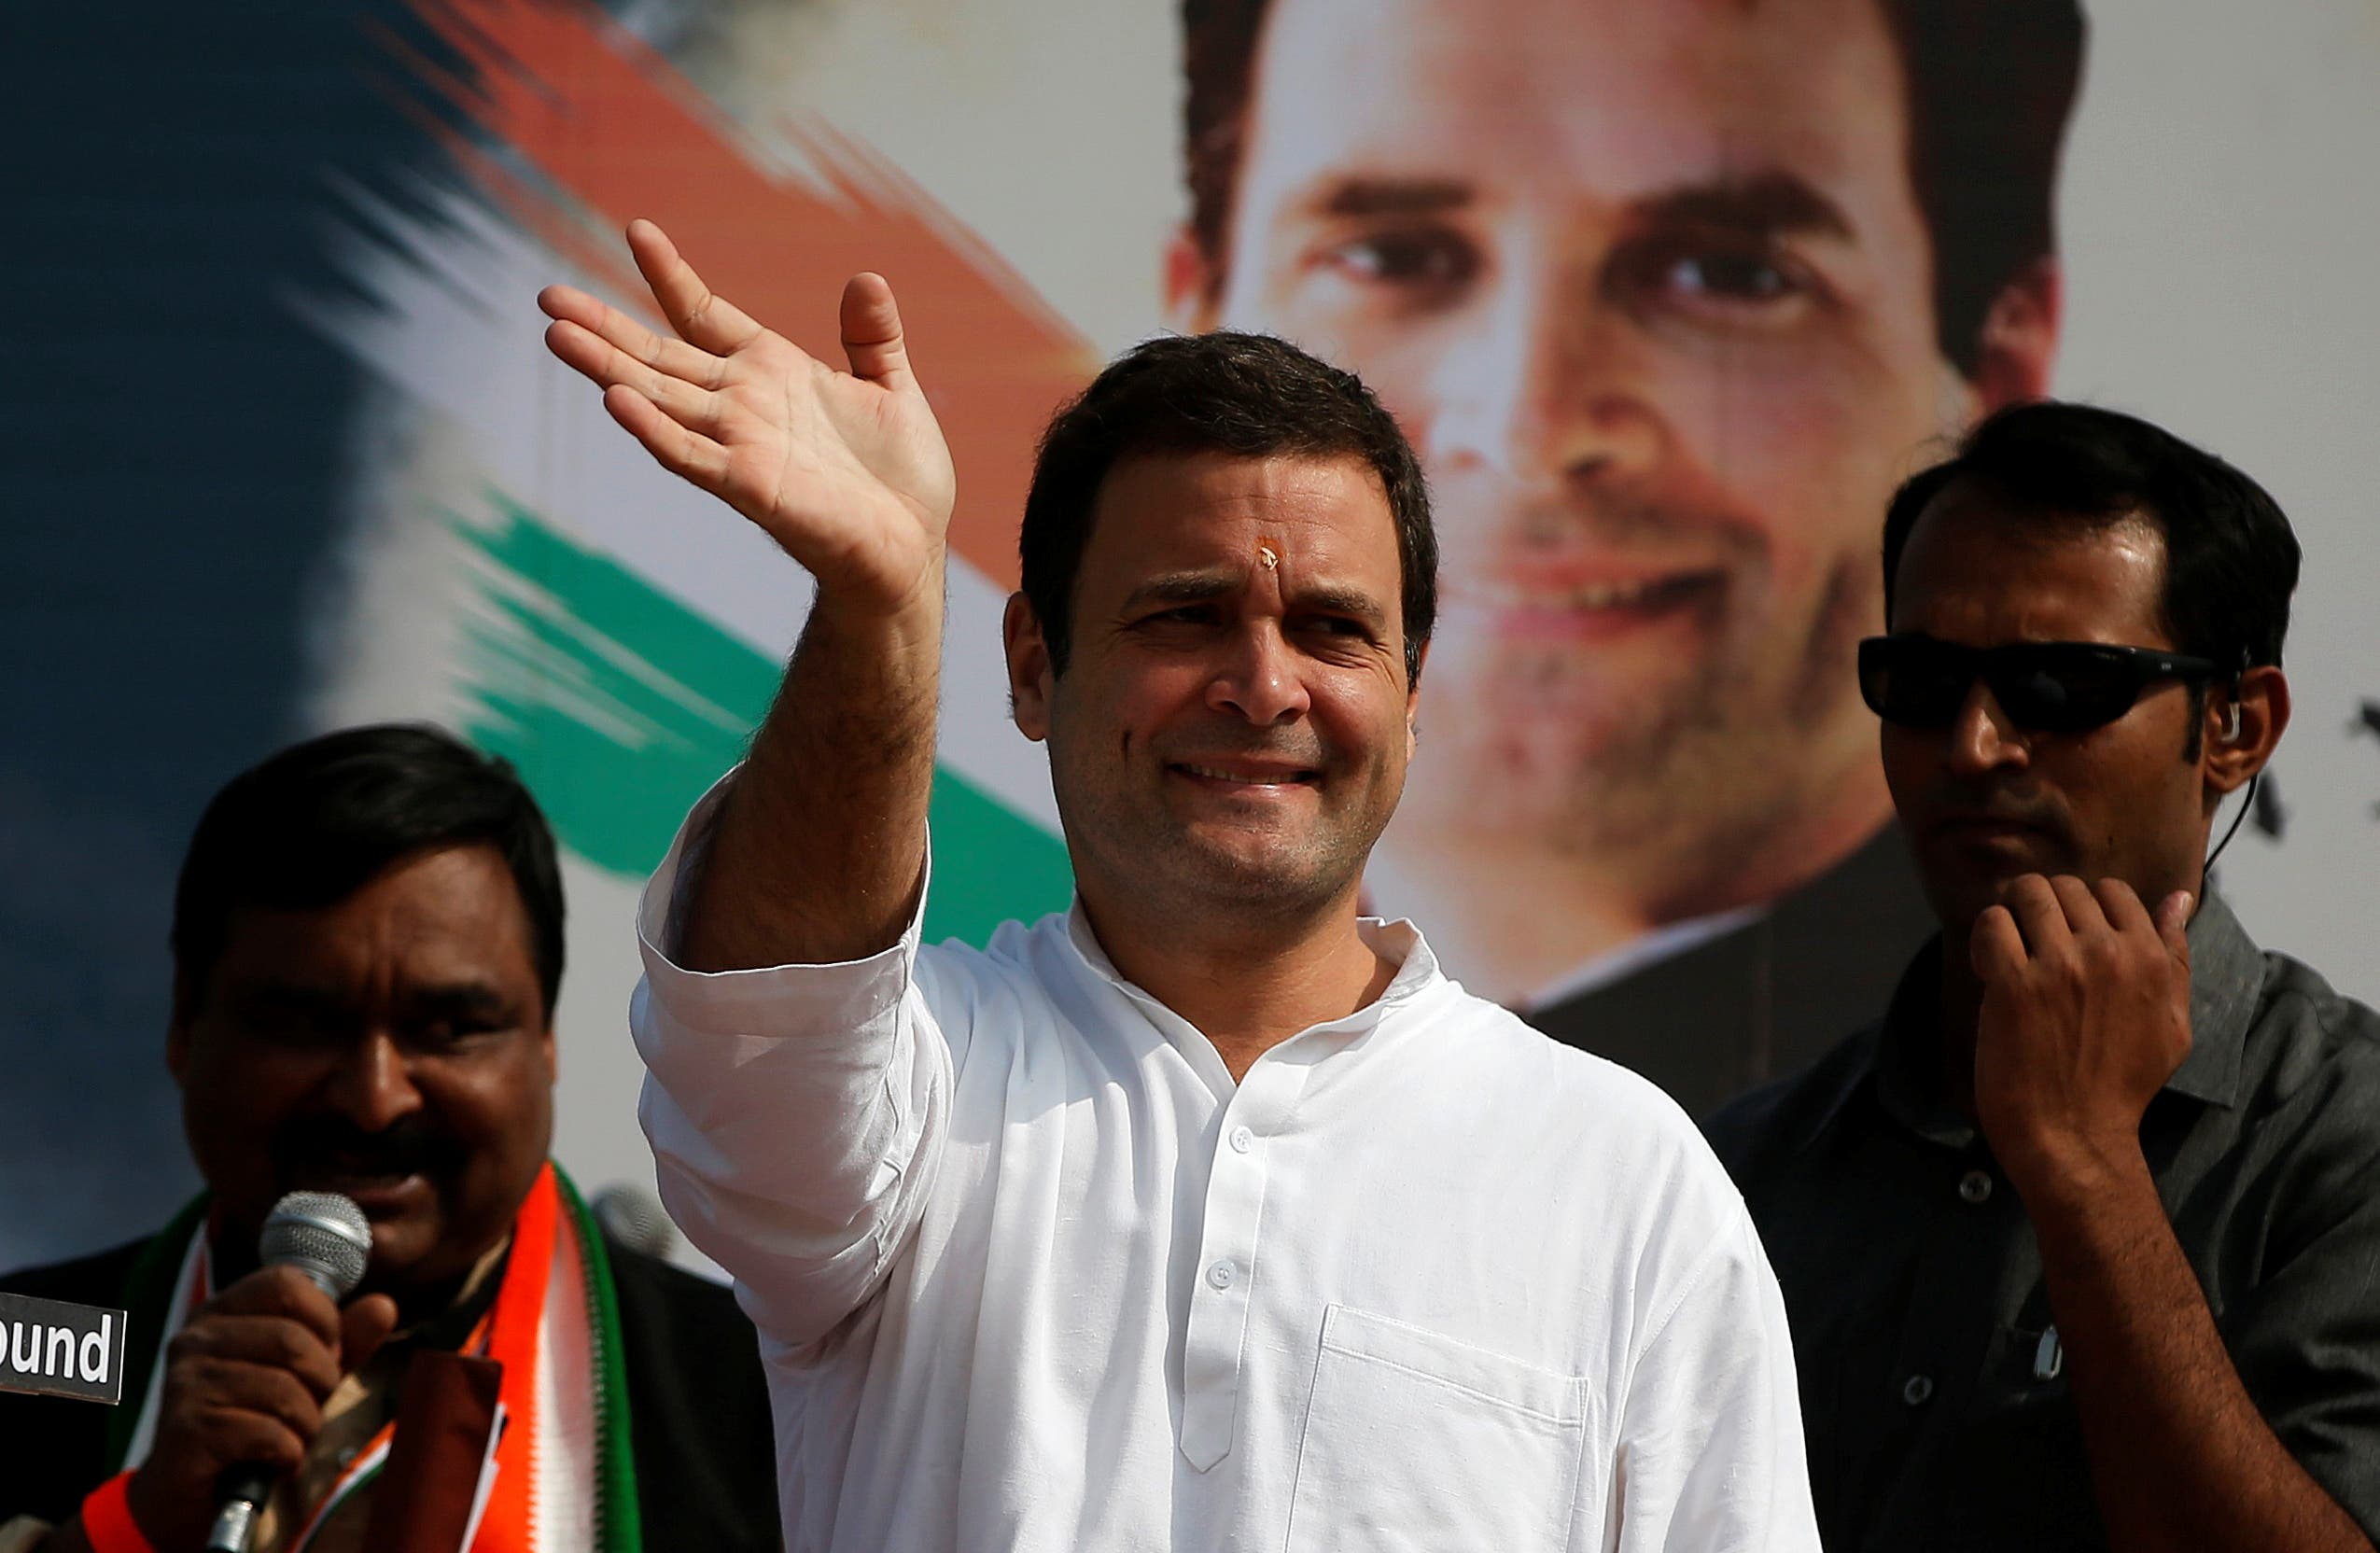 Rahul Gandhi waves to supporters during a rally ahead of Gujarat state assembly elections, on the outskirts of Ahmedabad, on November 11, 2017. (Reuters)